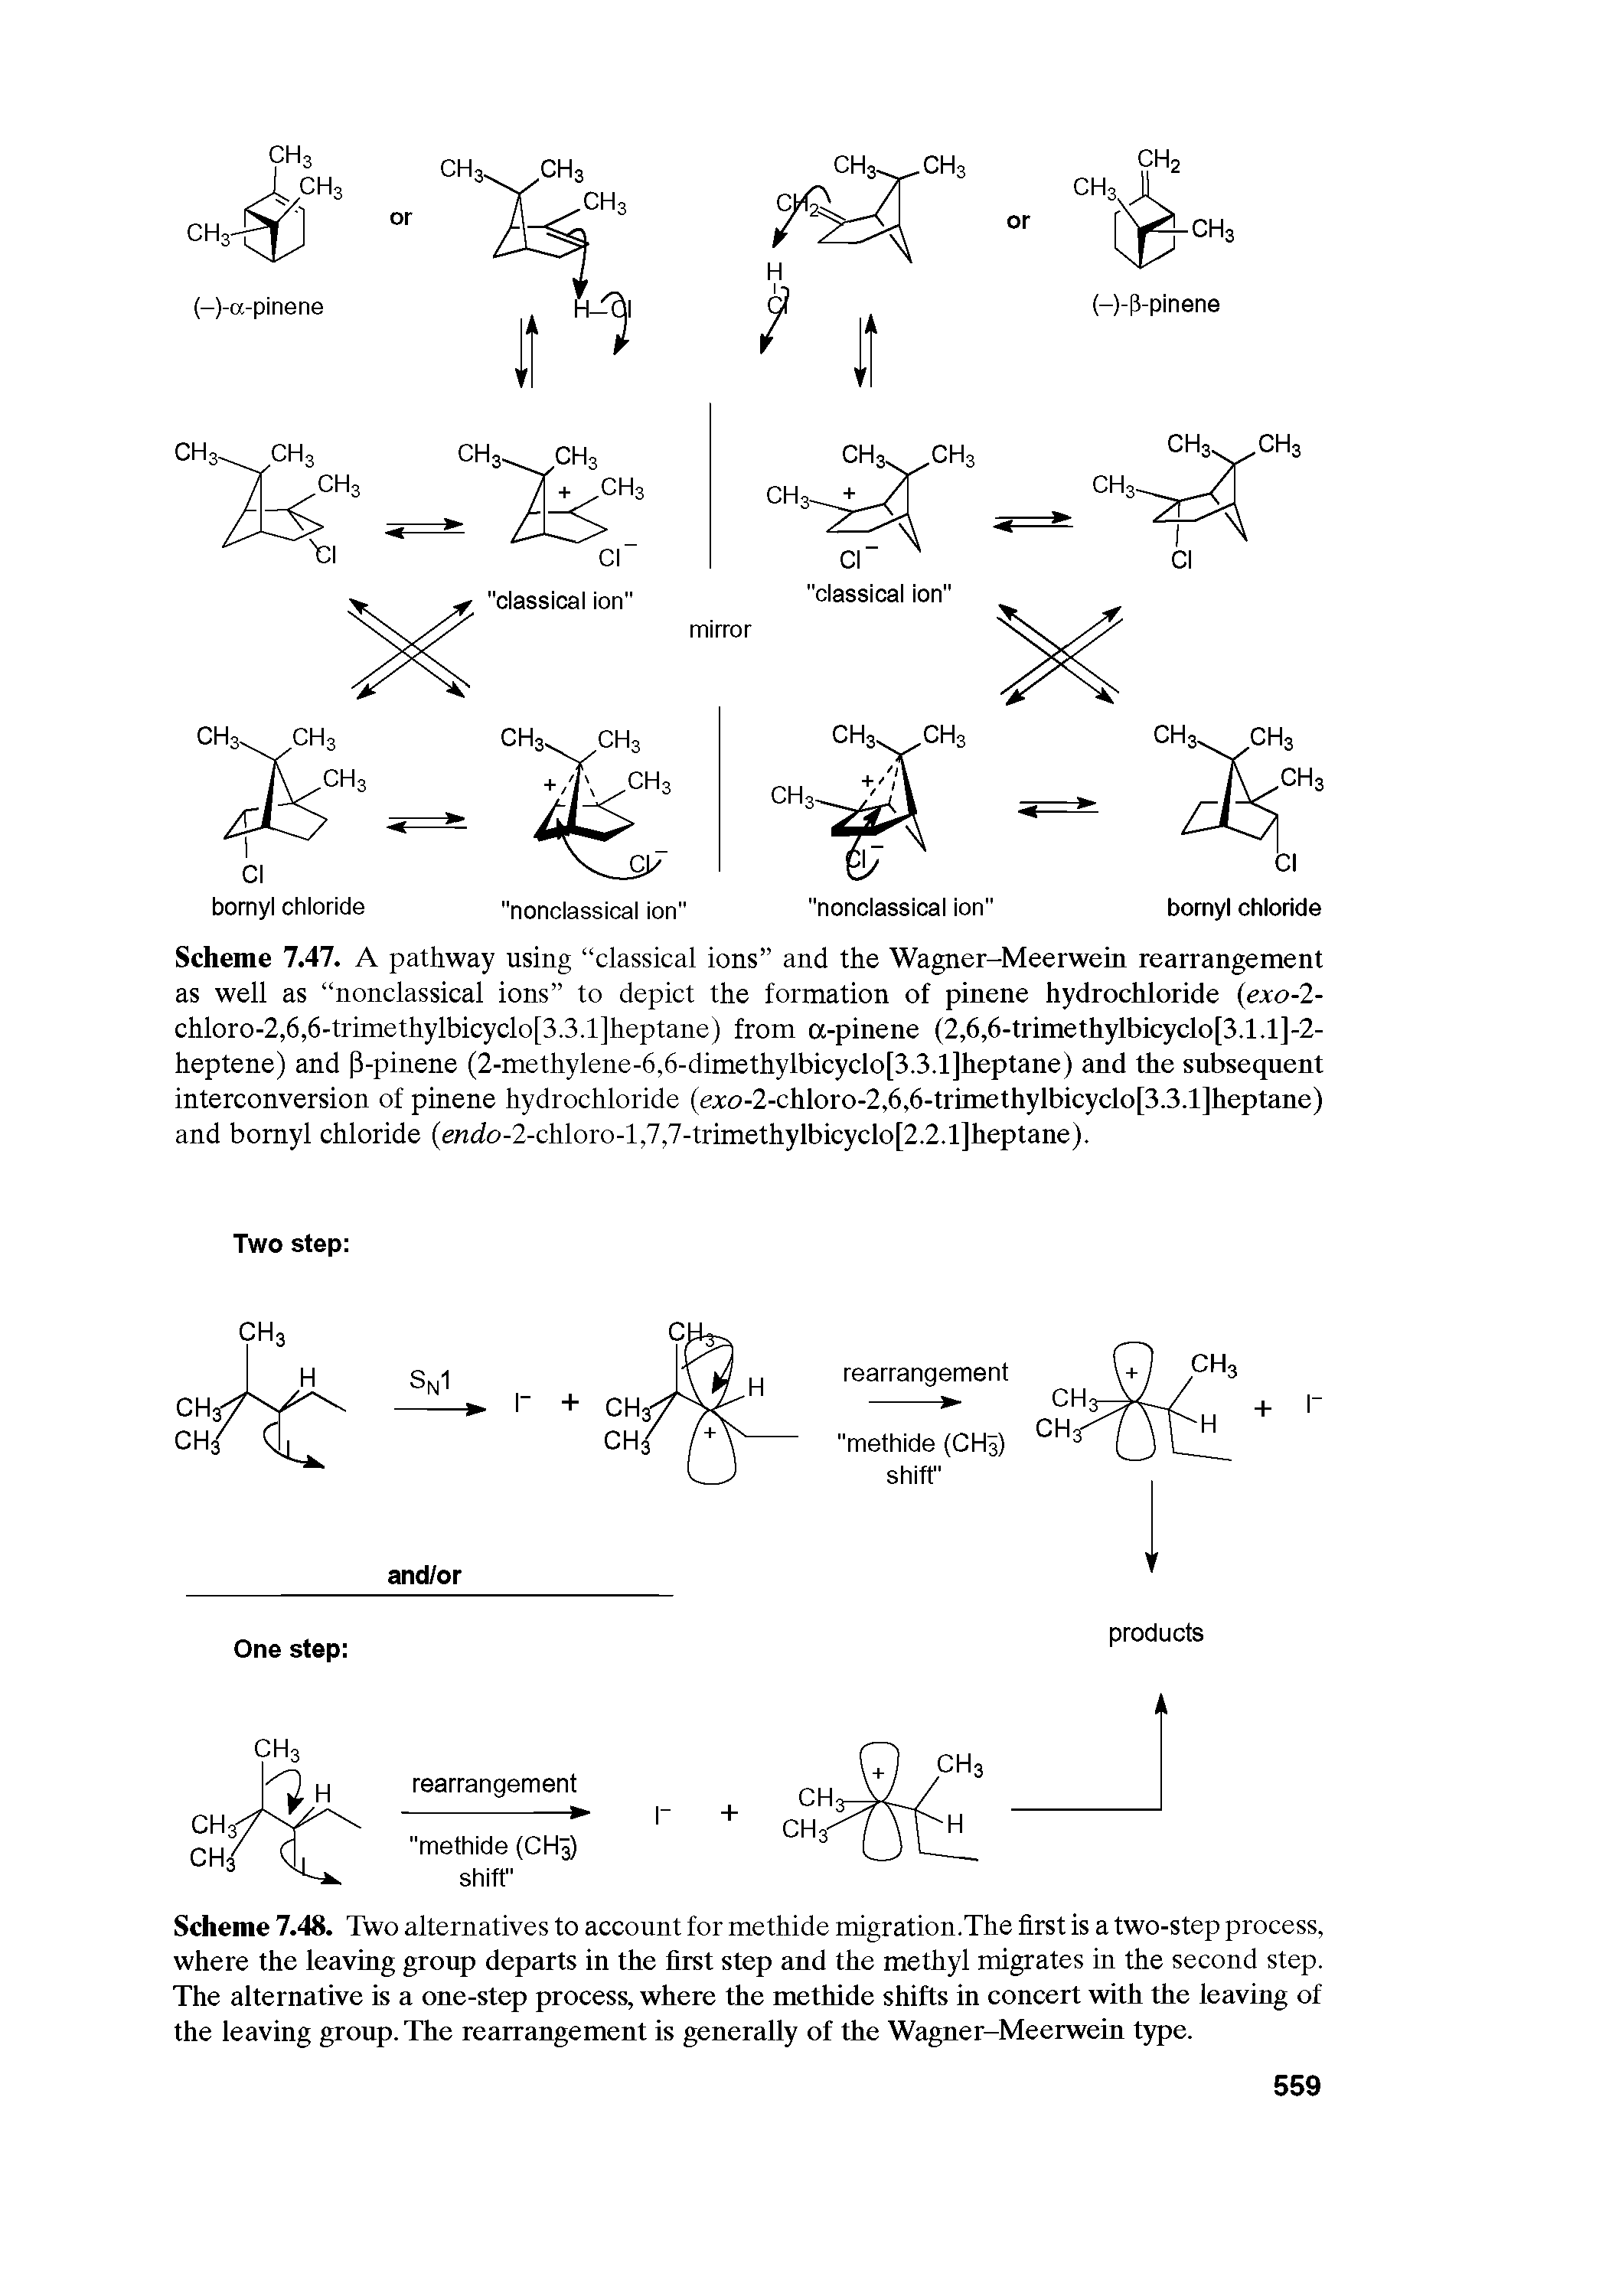 Scheme 7.47. A pathway using classical ions and the Wagner-Meerwein rearrangement as well as nonclassical ions to depict the formation of pinene hydrochloride (exo-2-chloro-2,6,6-trimethylbicyclo[3.3.1]heptane) from a-pinene (2,6,6-trimethylbicyclo[3.1.1]-2-heptene) and 3-pinene (2-methylene-6,6-dimethylbicyclo[3.3.1]heptane) and the subsequent interconversion of pinene hydrochloride (eA o-2-chloro-2,6,6-trimethylbicyclo[3.3.1]heptane) and bornyl chloride (enrio-2-chloro-l,7,7-trimethylbicyclo[2.2.1]heptane).